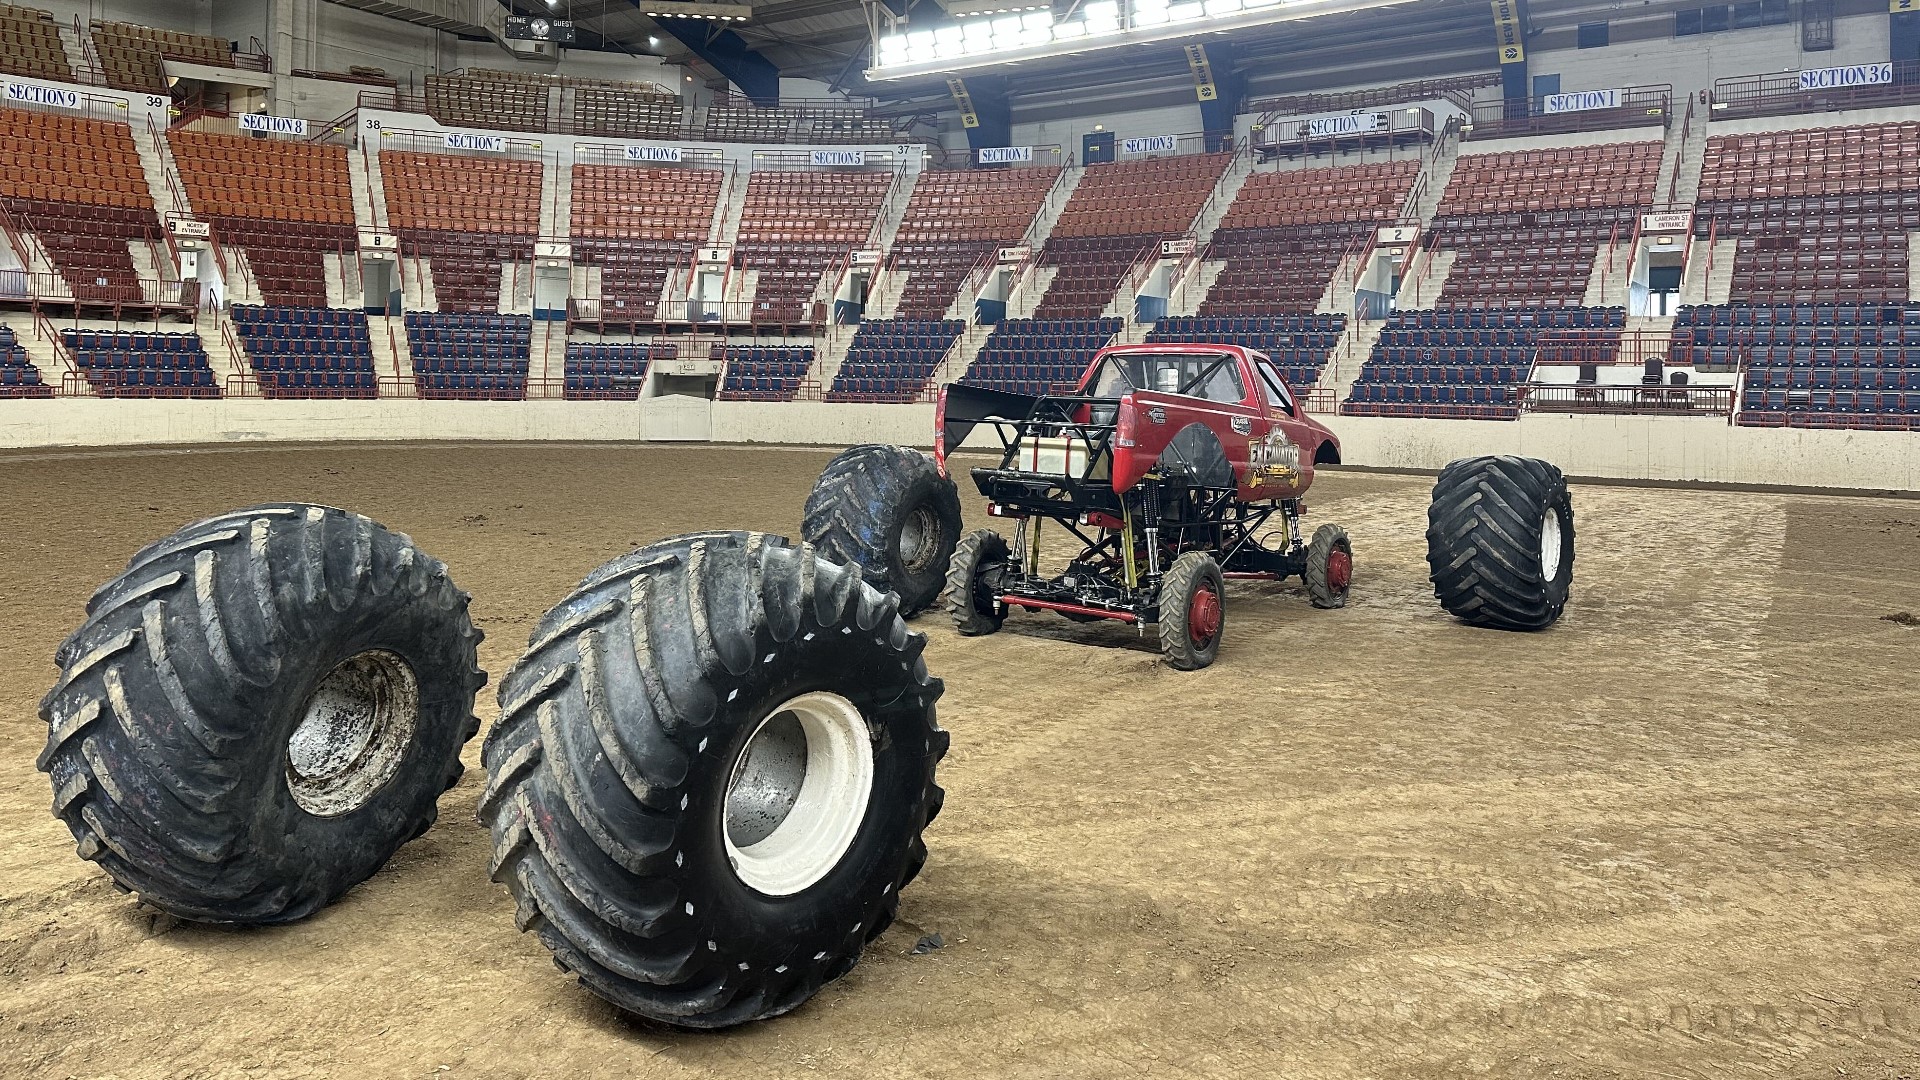 Monster Truck Thunder will have shows all weekend long inside the New Holland Arena at the Farm Show Complex.